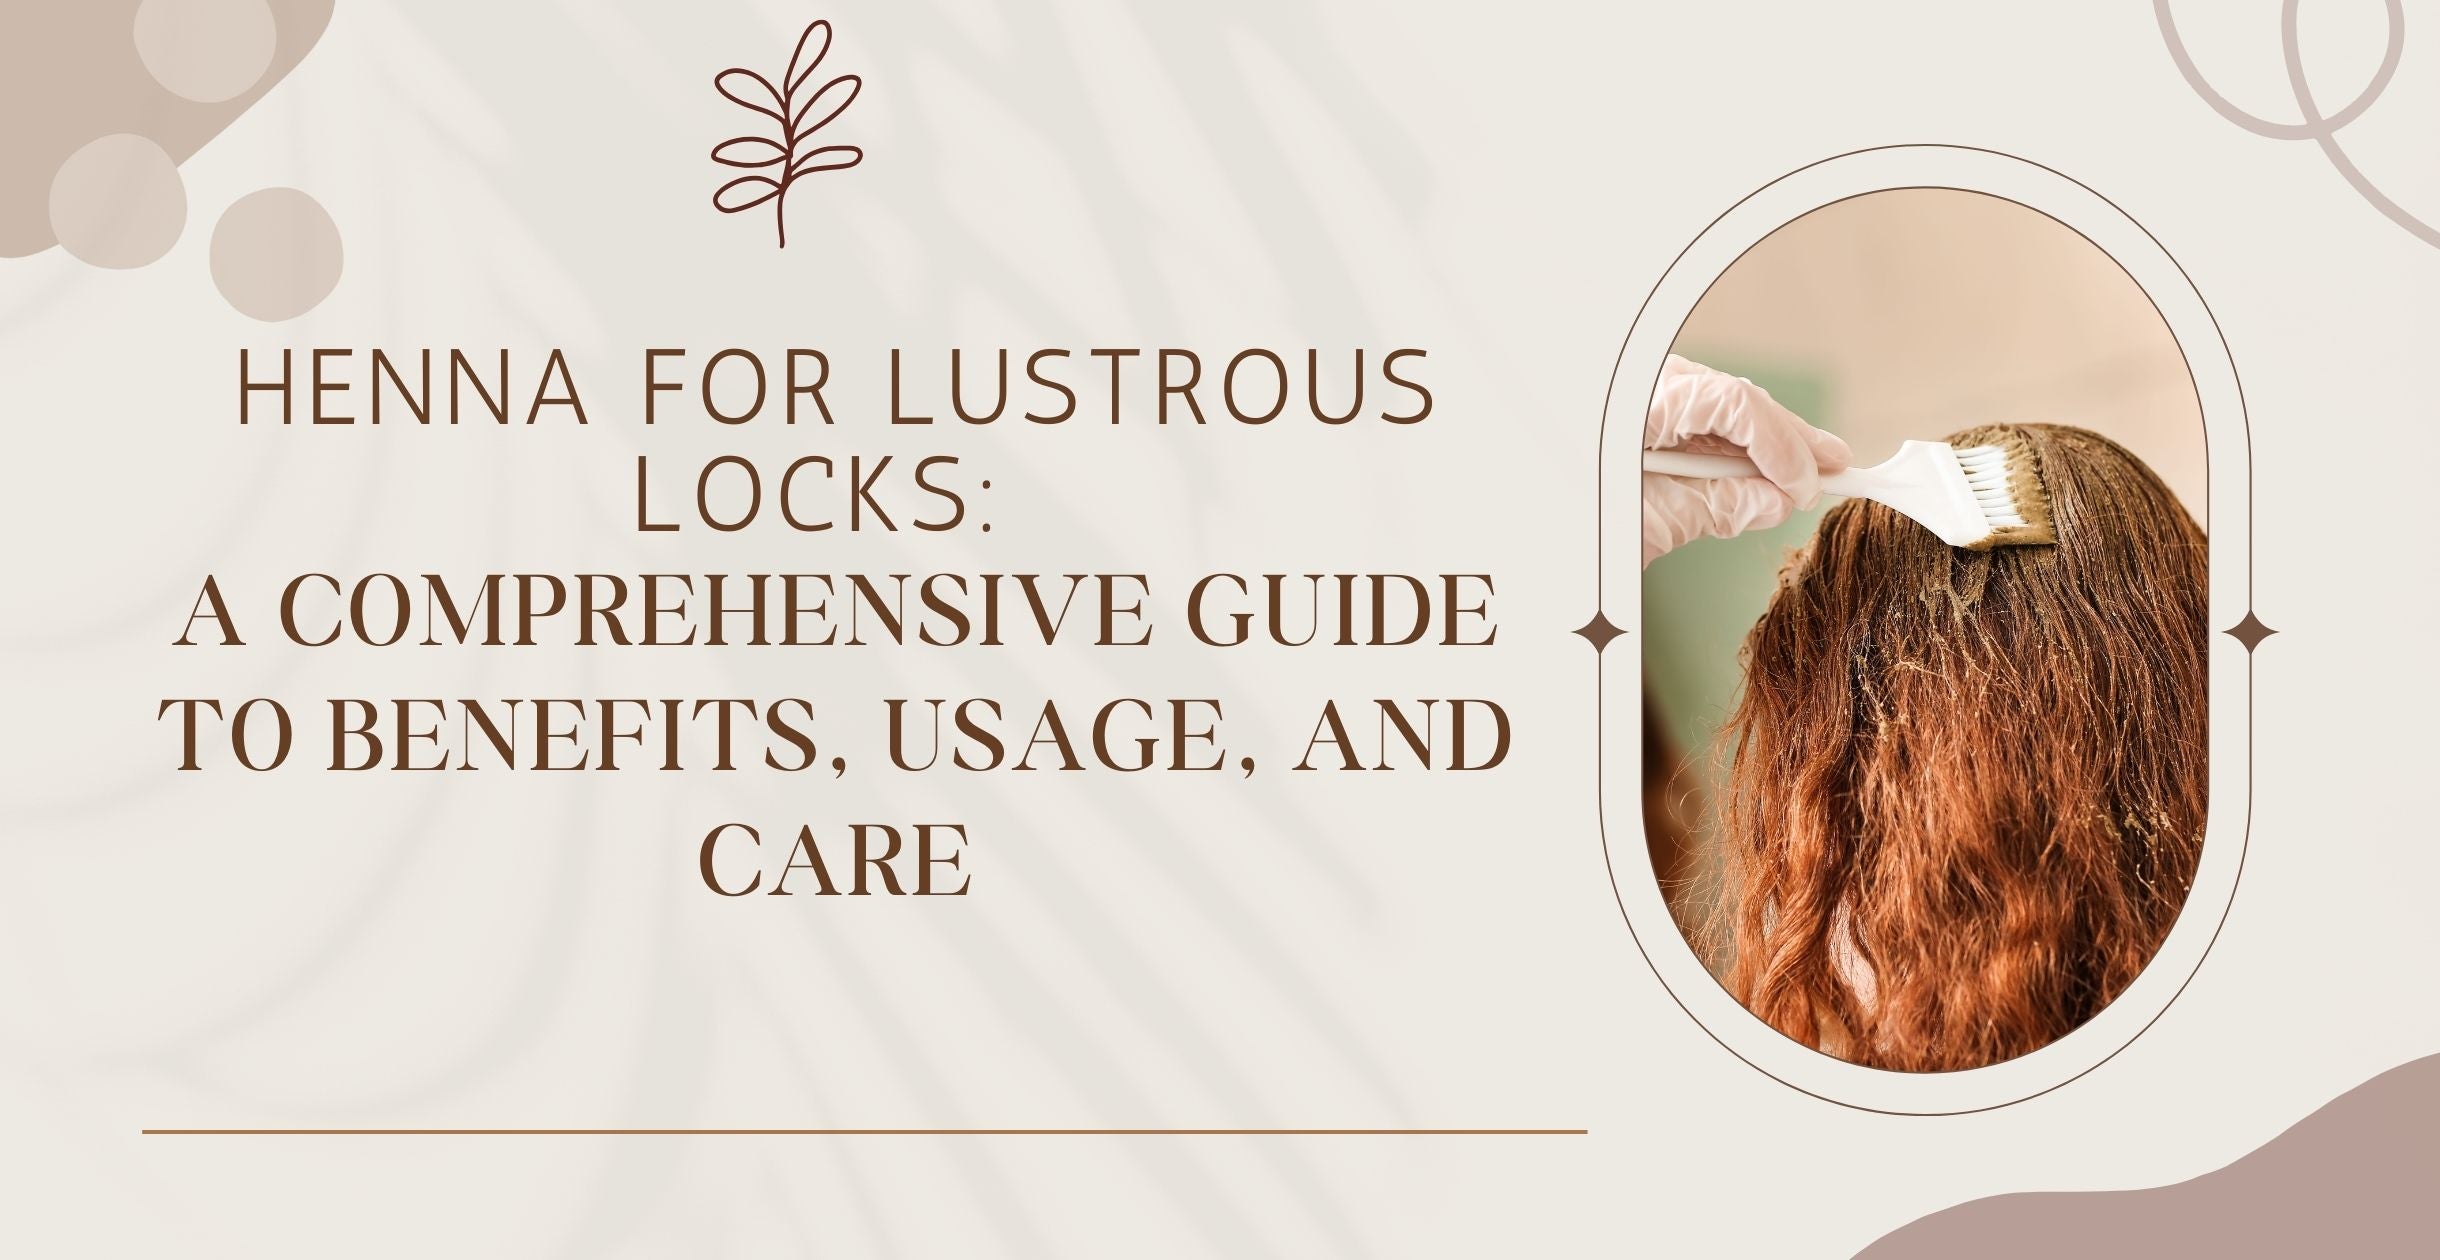 Henna for Lustrous Locks: A Comprehensive Guide to Benefits, Usage, and Care